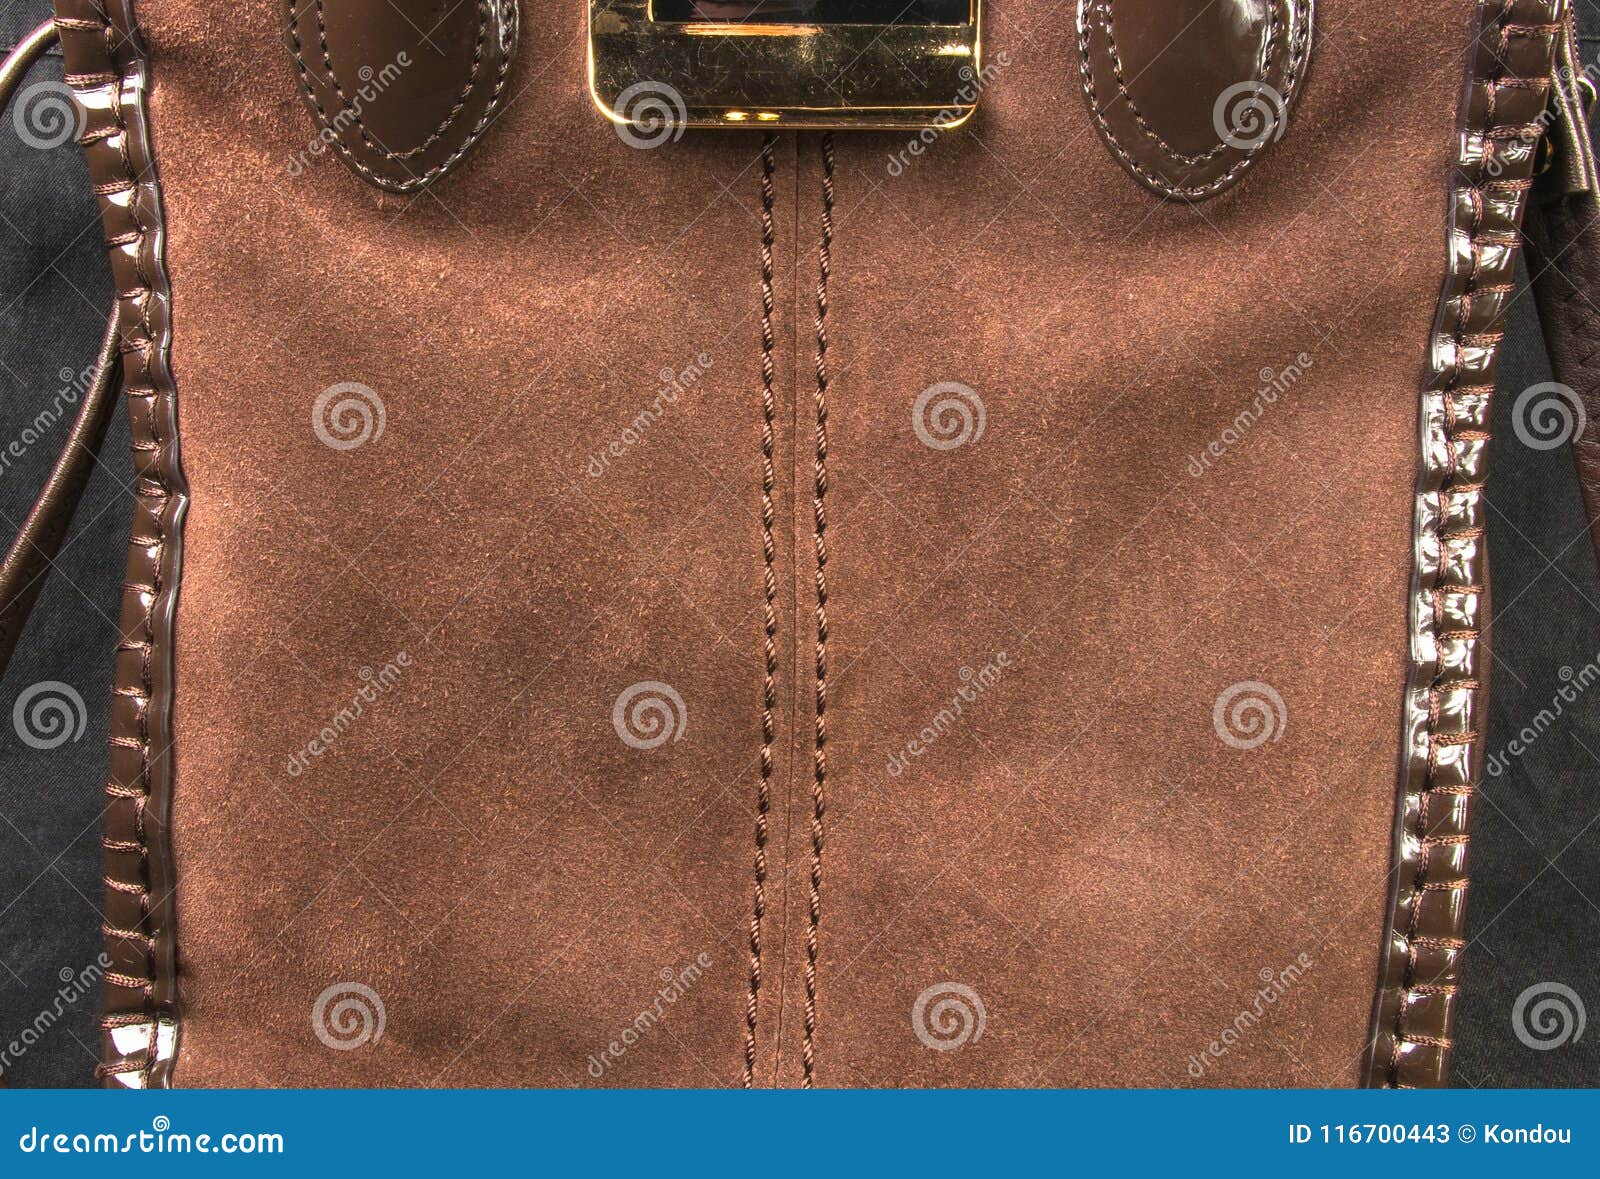 Seams on leather hand bag stock image. Image of durable - 116700443